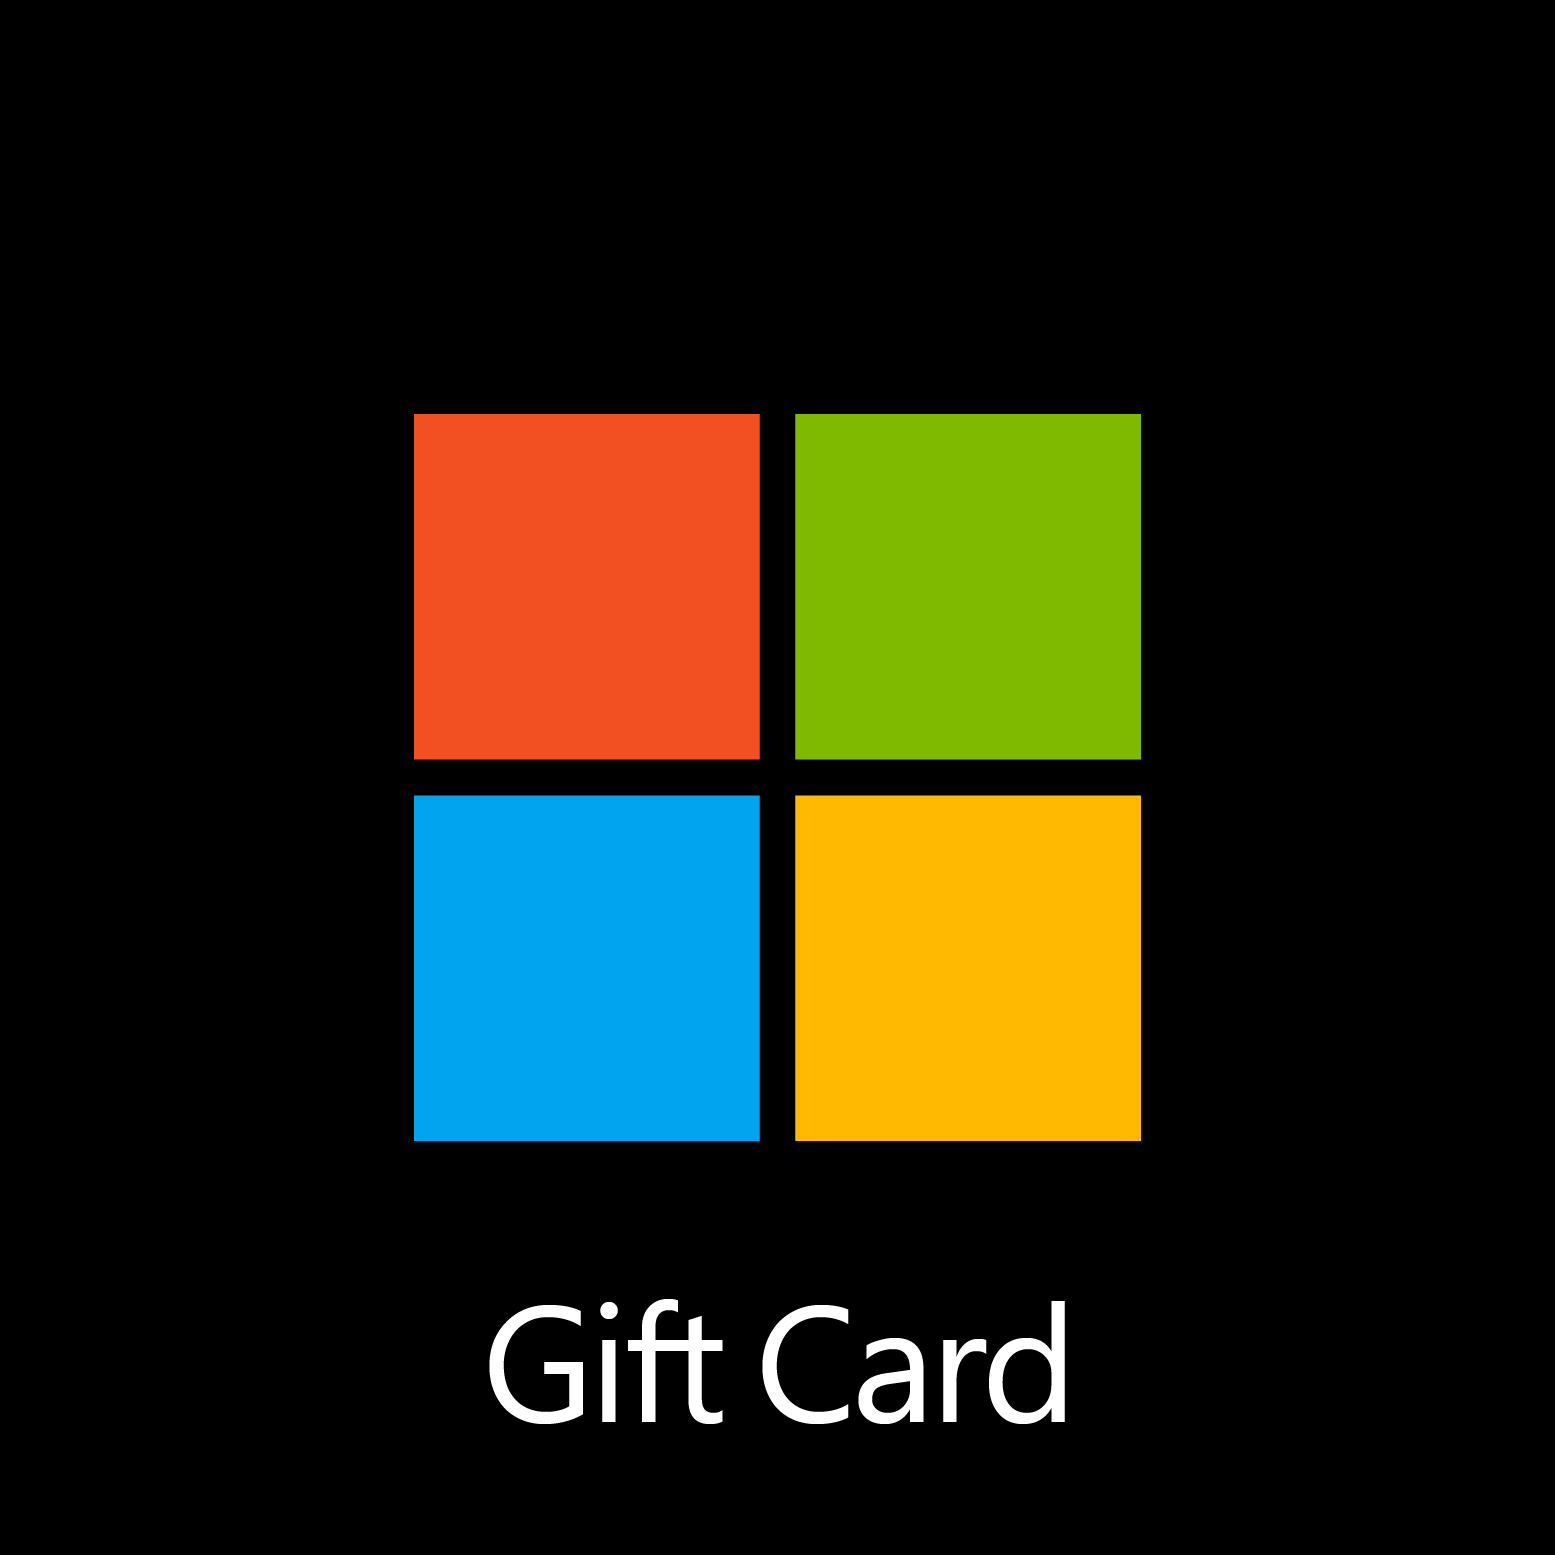 can you buy a xbox gift card with a target gift card